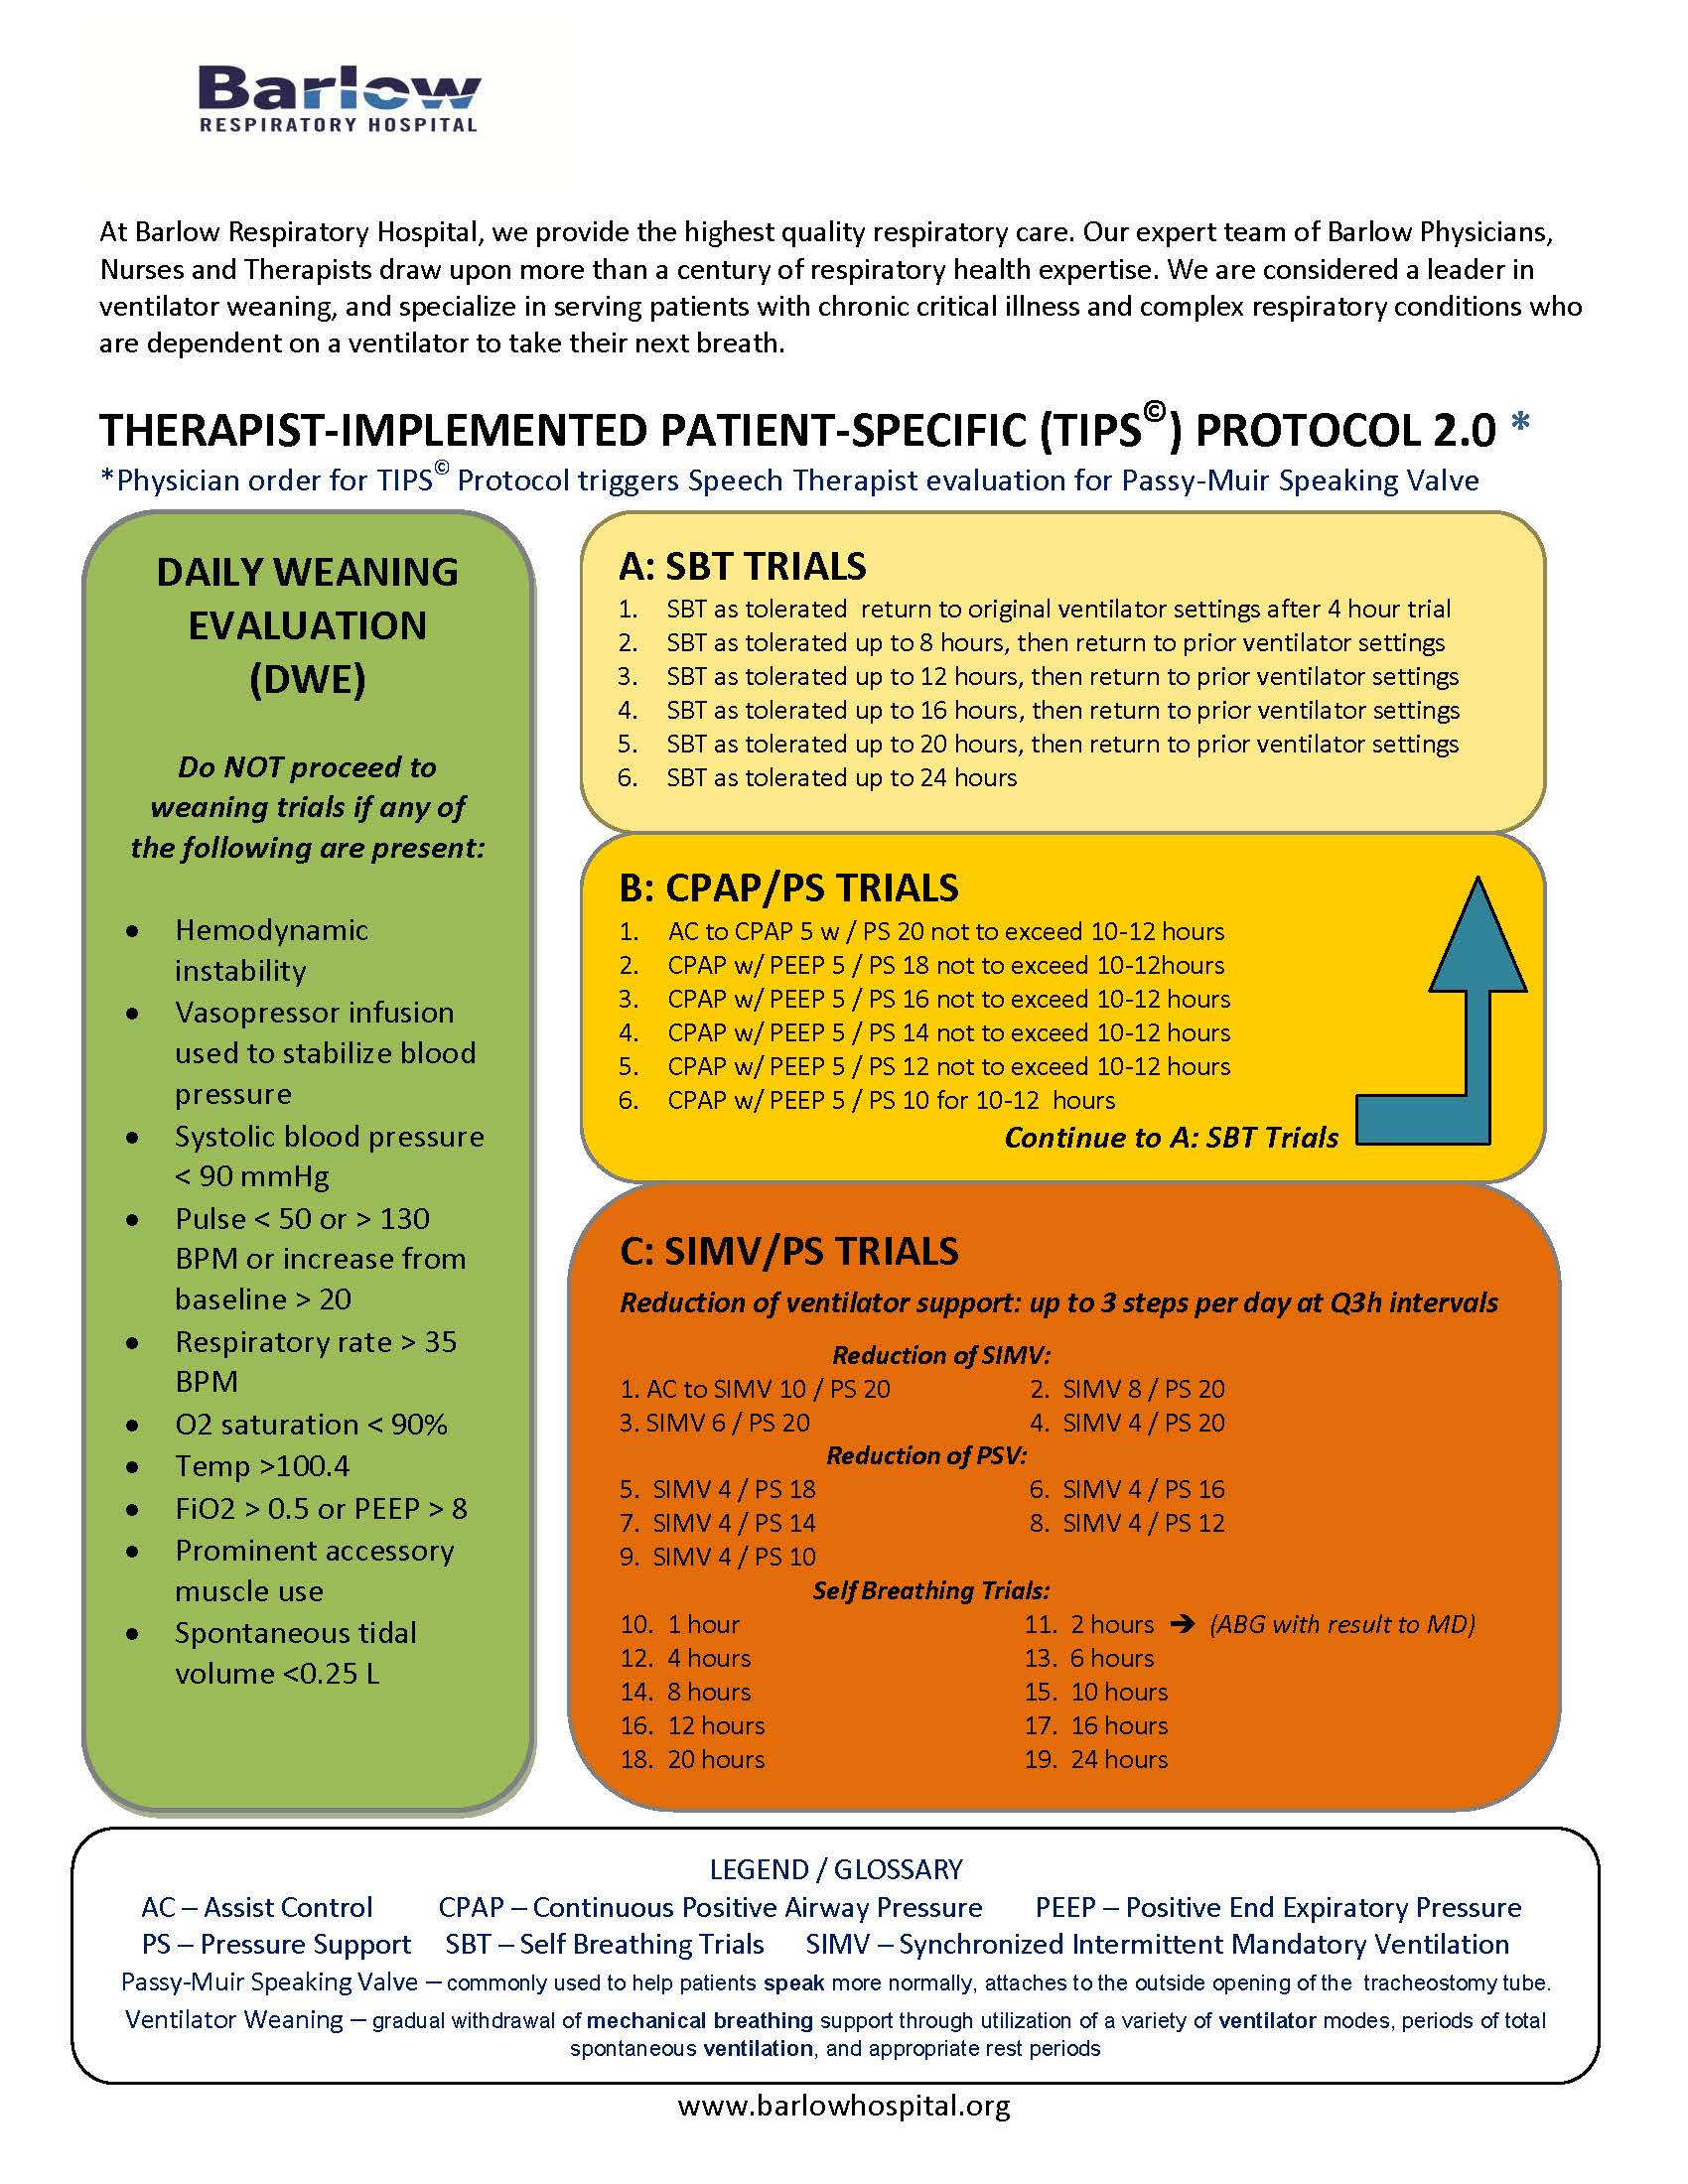 Infographic explaining Barlow Respiratory Hospital Therapist-Implemented Patient-Specific “TIPS©” Weaning Protocol